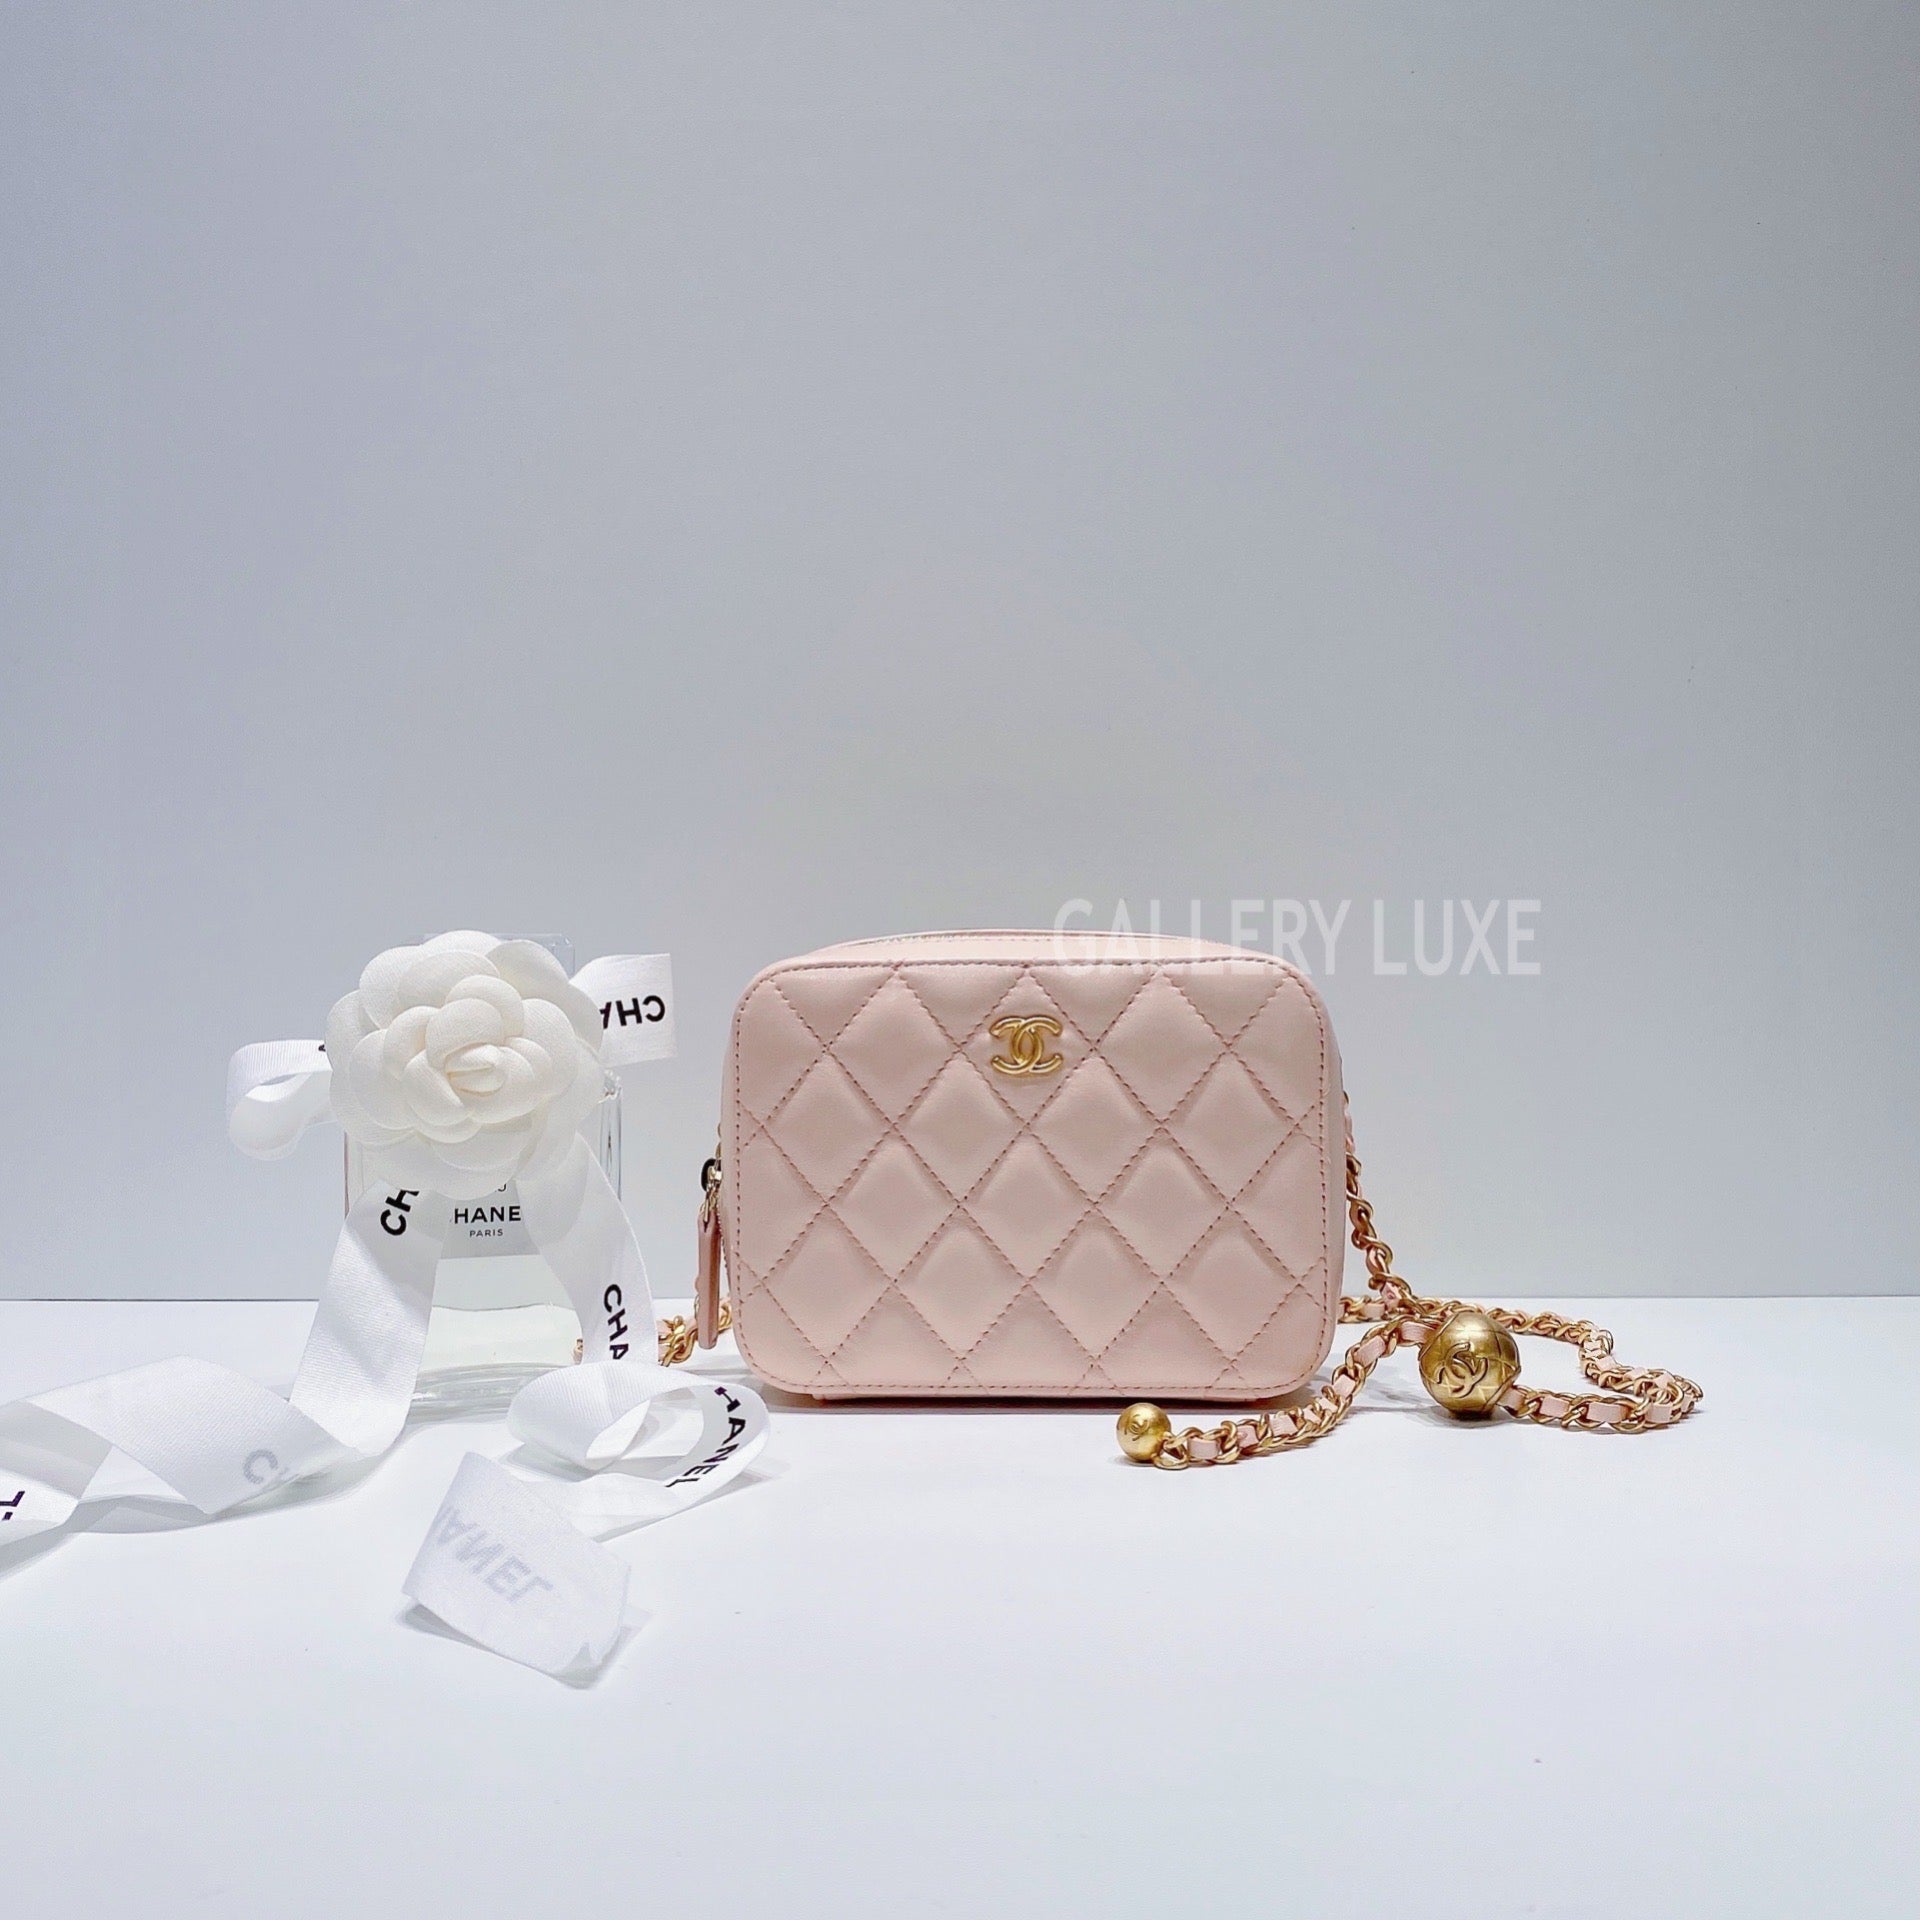 No.3476-Chanel Pearl Crush Camera Bag (Brand New / 全新貨品) – Gallery Luxe